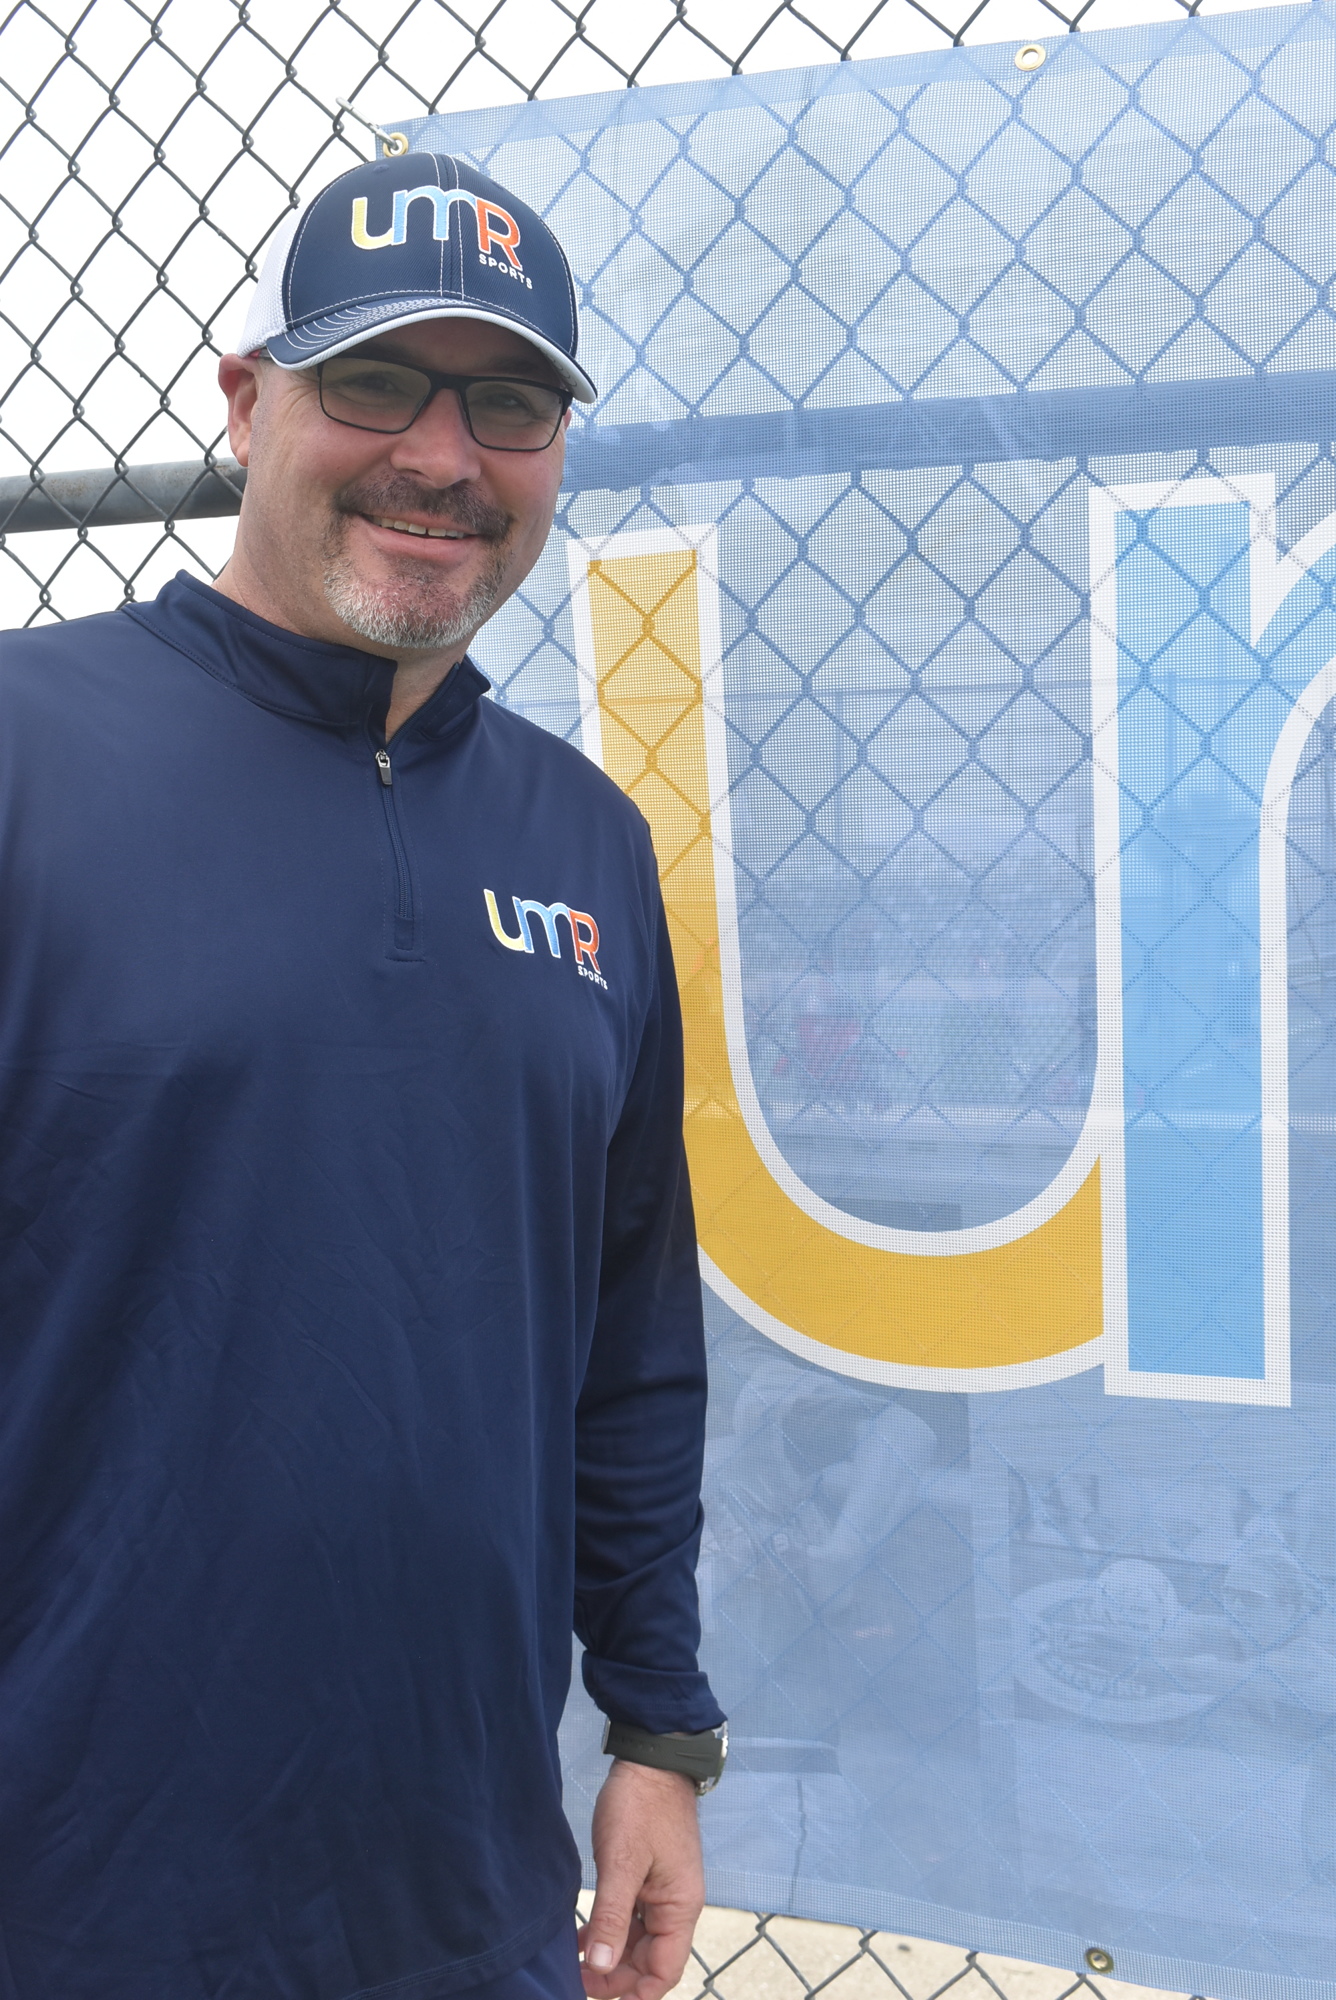 UMR Sports founder and owner Ryan Moore wants his company to become a household name in East County after he builds a sports complex for it. Pickleball and sand volleyball courts will be the first facilities constructed.